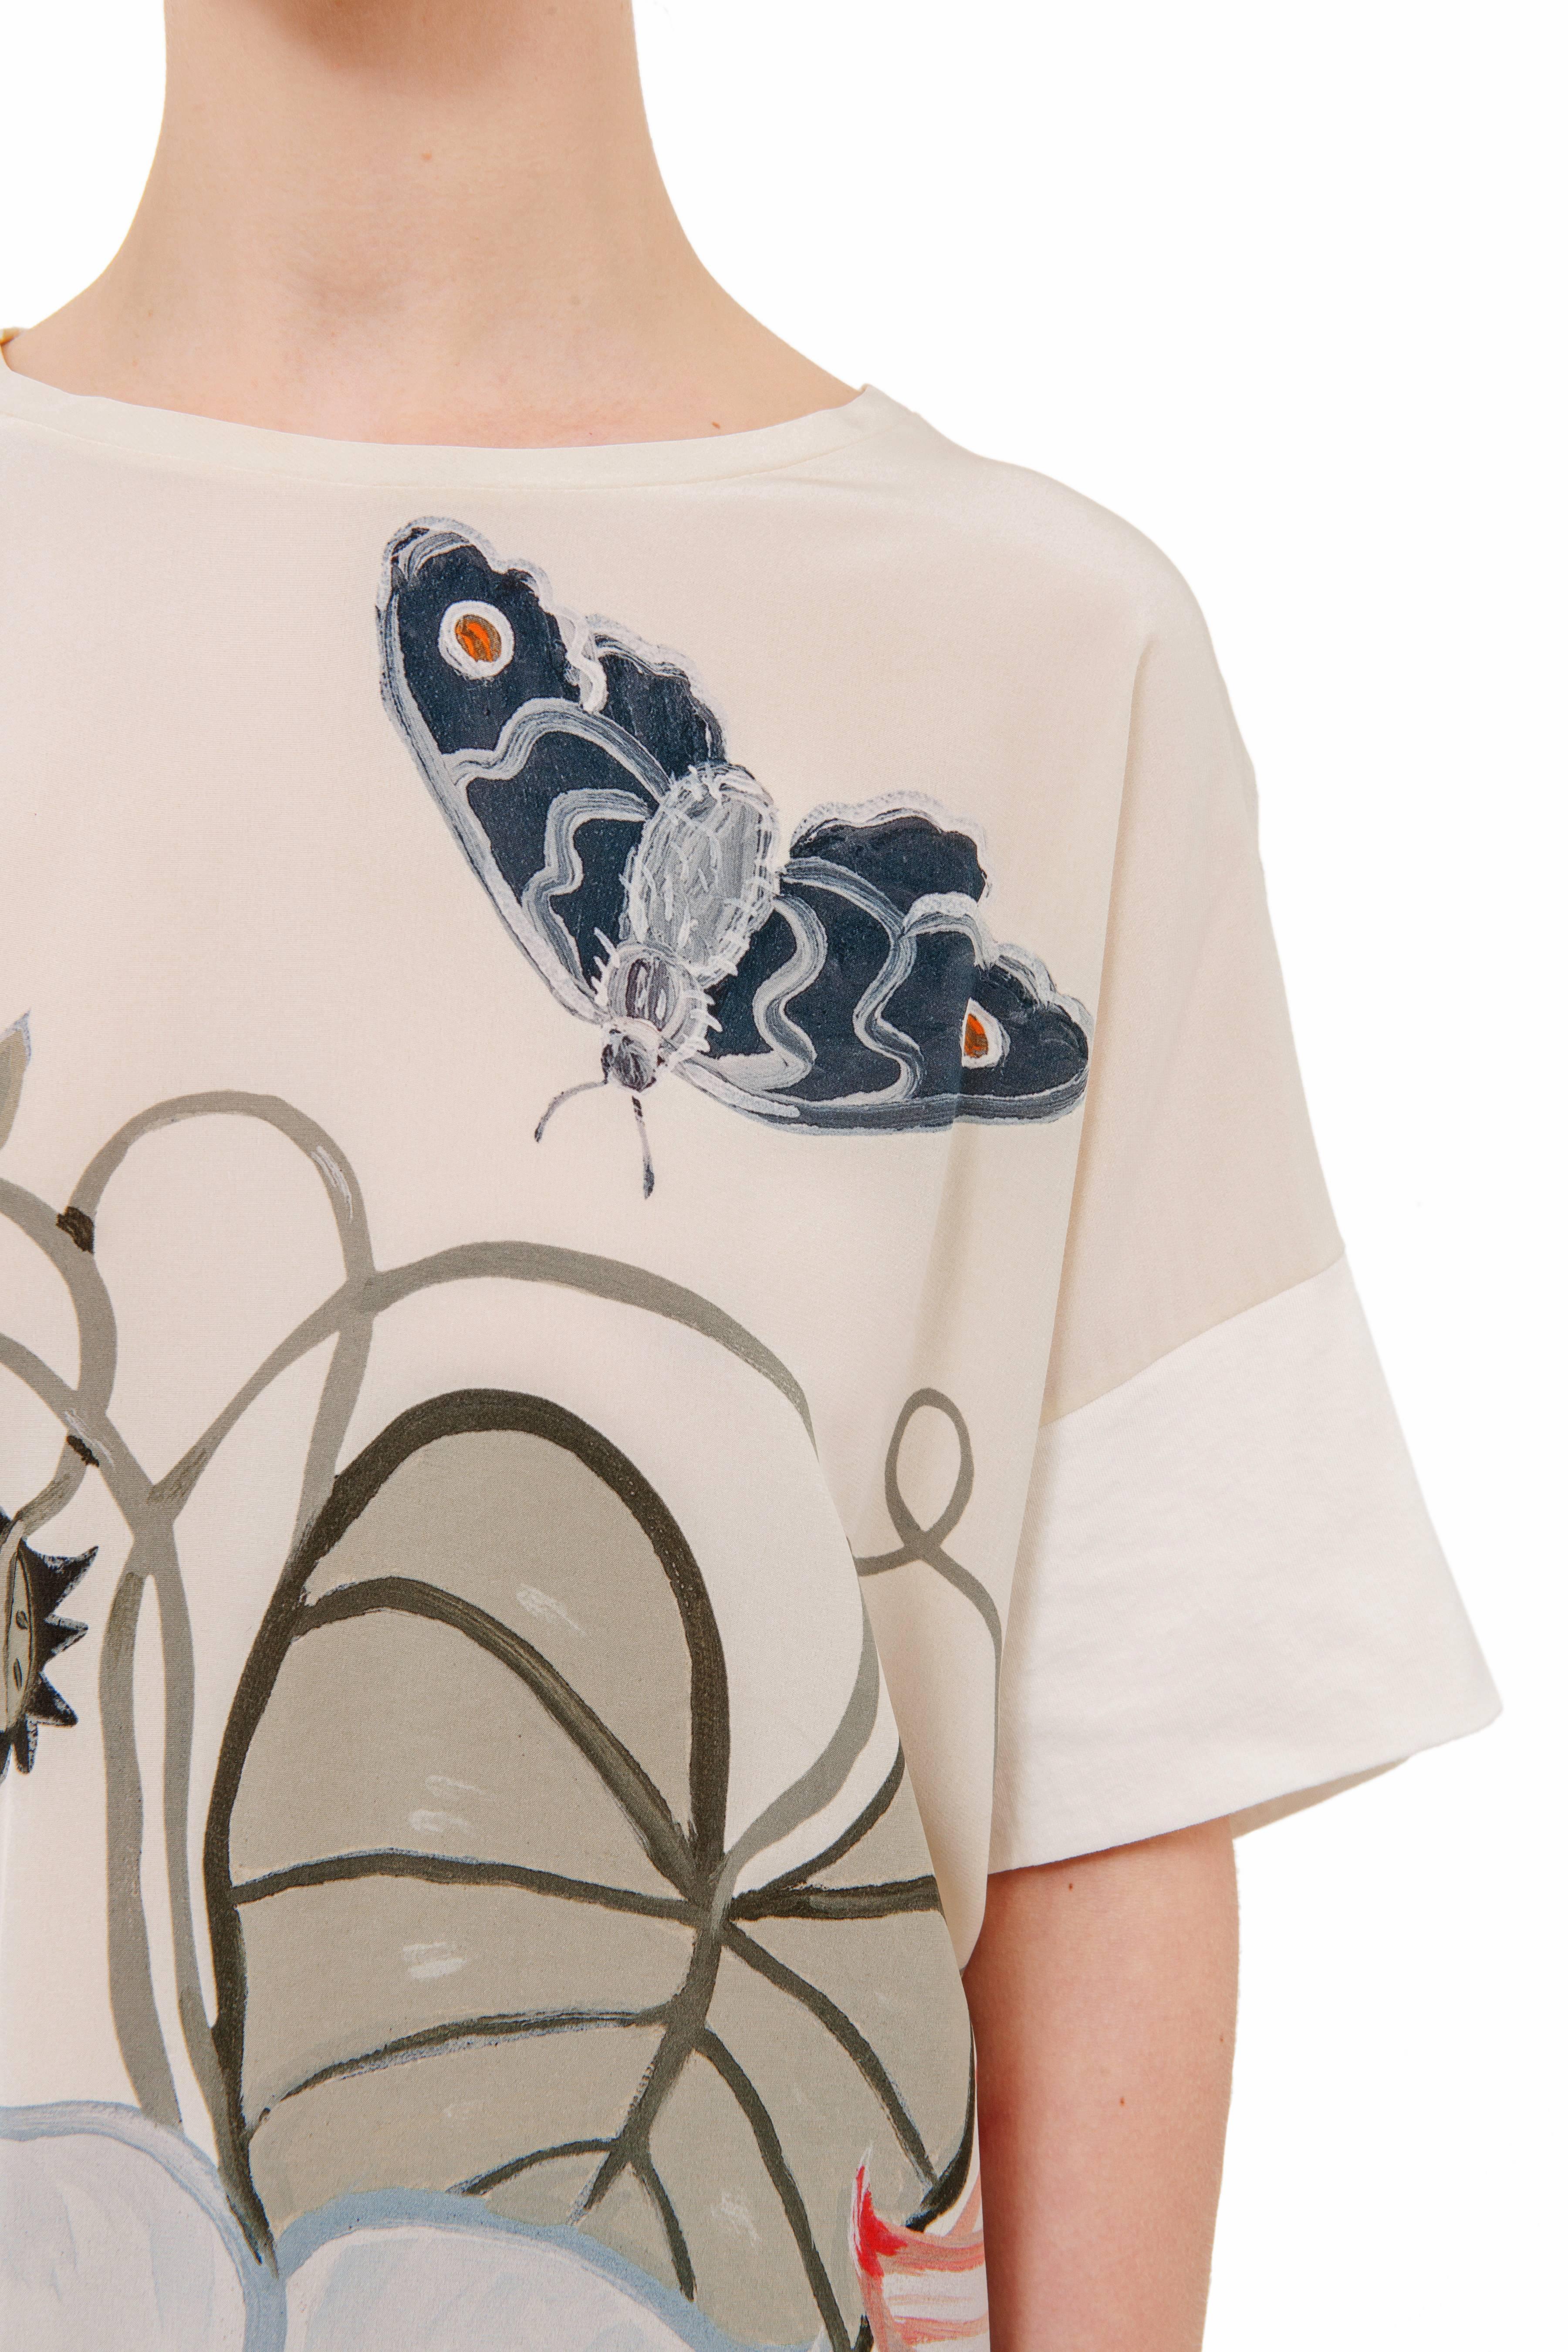 Gucci and Kris Knight Resort Ivory Silk Floral Butterfly Shirt, 2015 at 